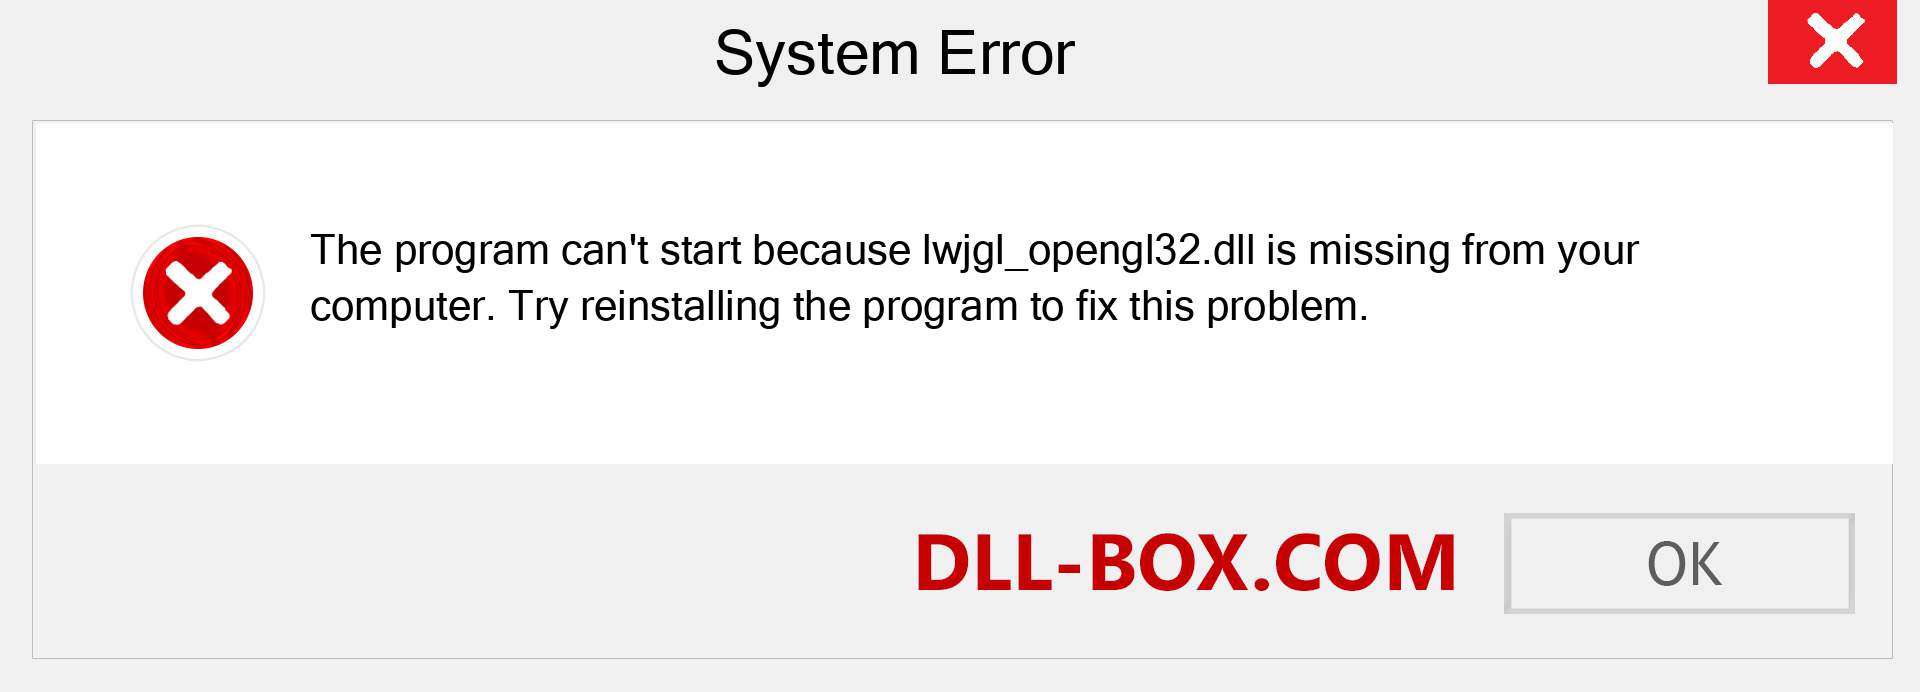  lwjgl_opengl32.dll file is missing?. Download for Windows 7, 8, 10 - Fix  lwjgl_opengl32 dll Missing Error on Windows, photos, images